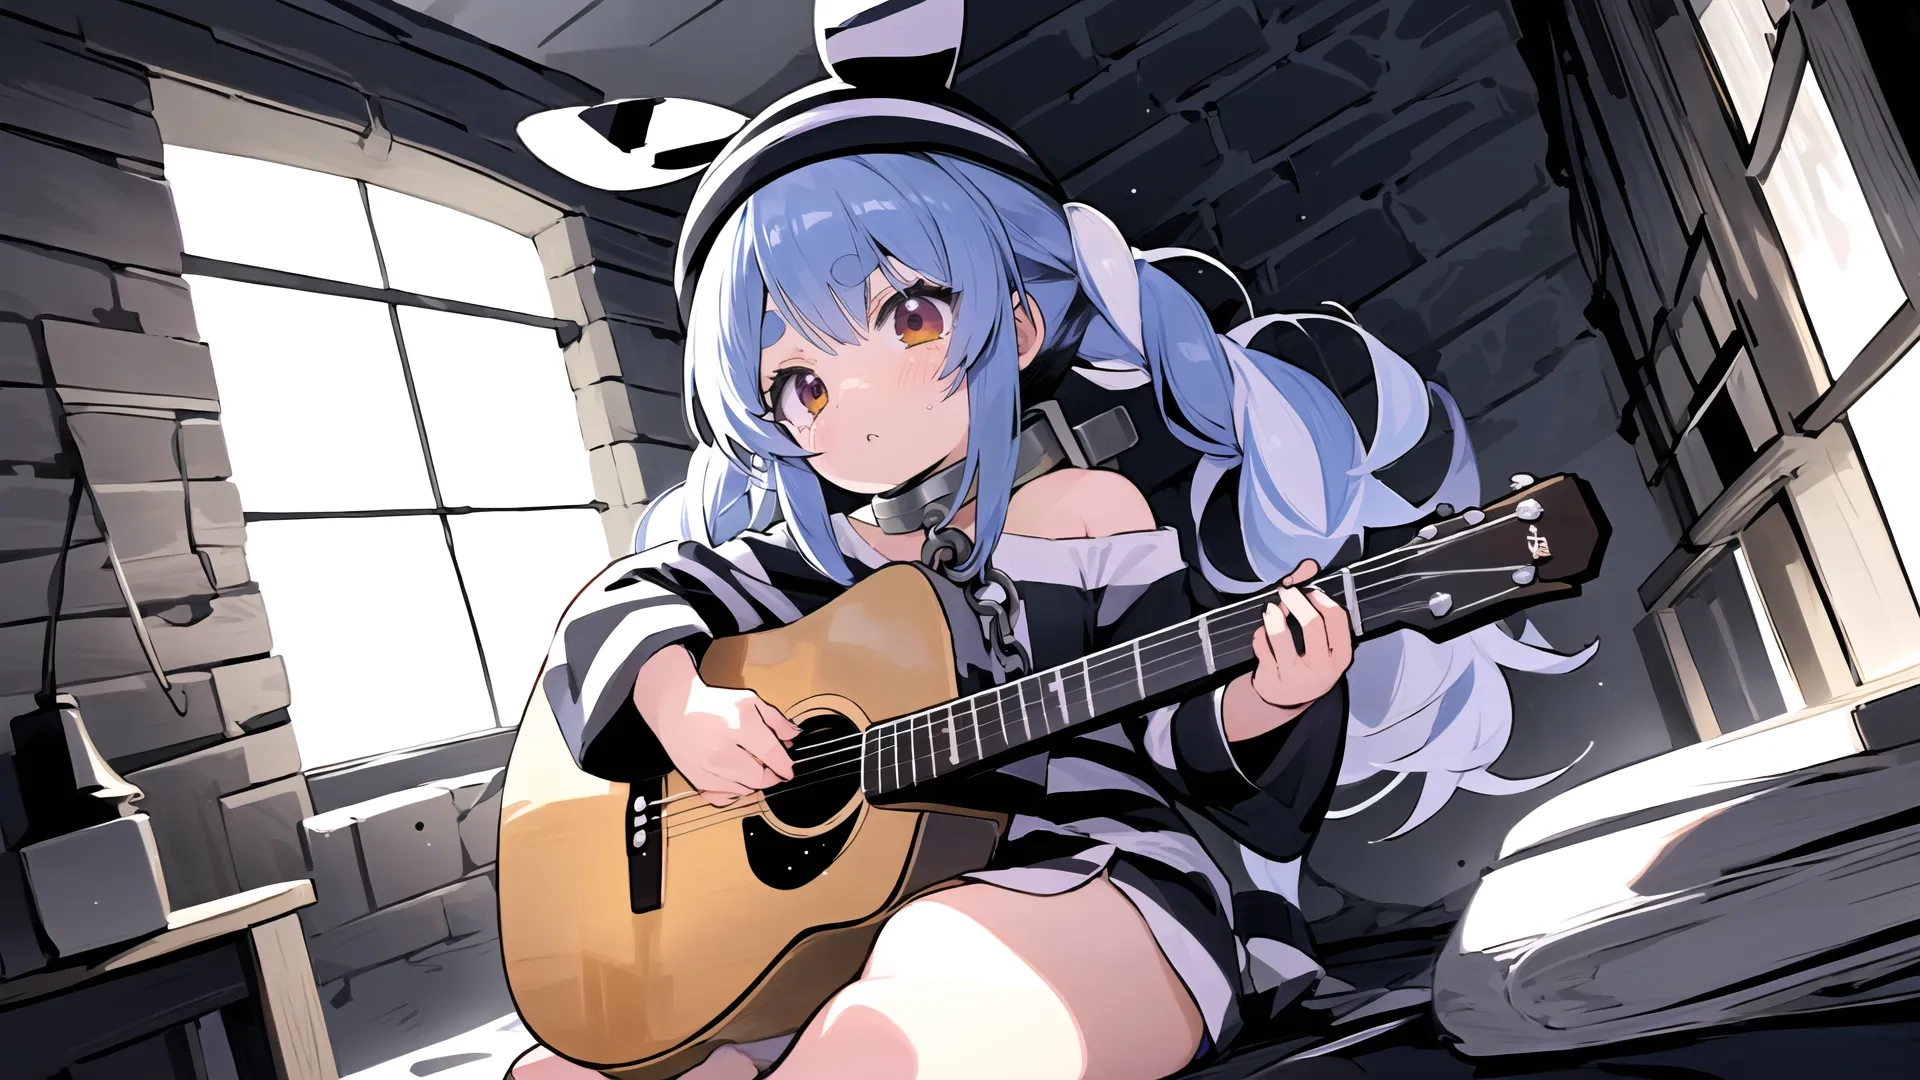 the artist is playing a guitar by his window by himself using a cell phone for perspective and one hand holding it close to her head
